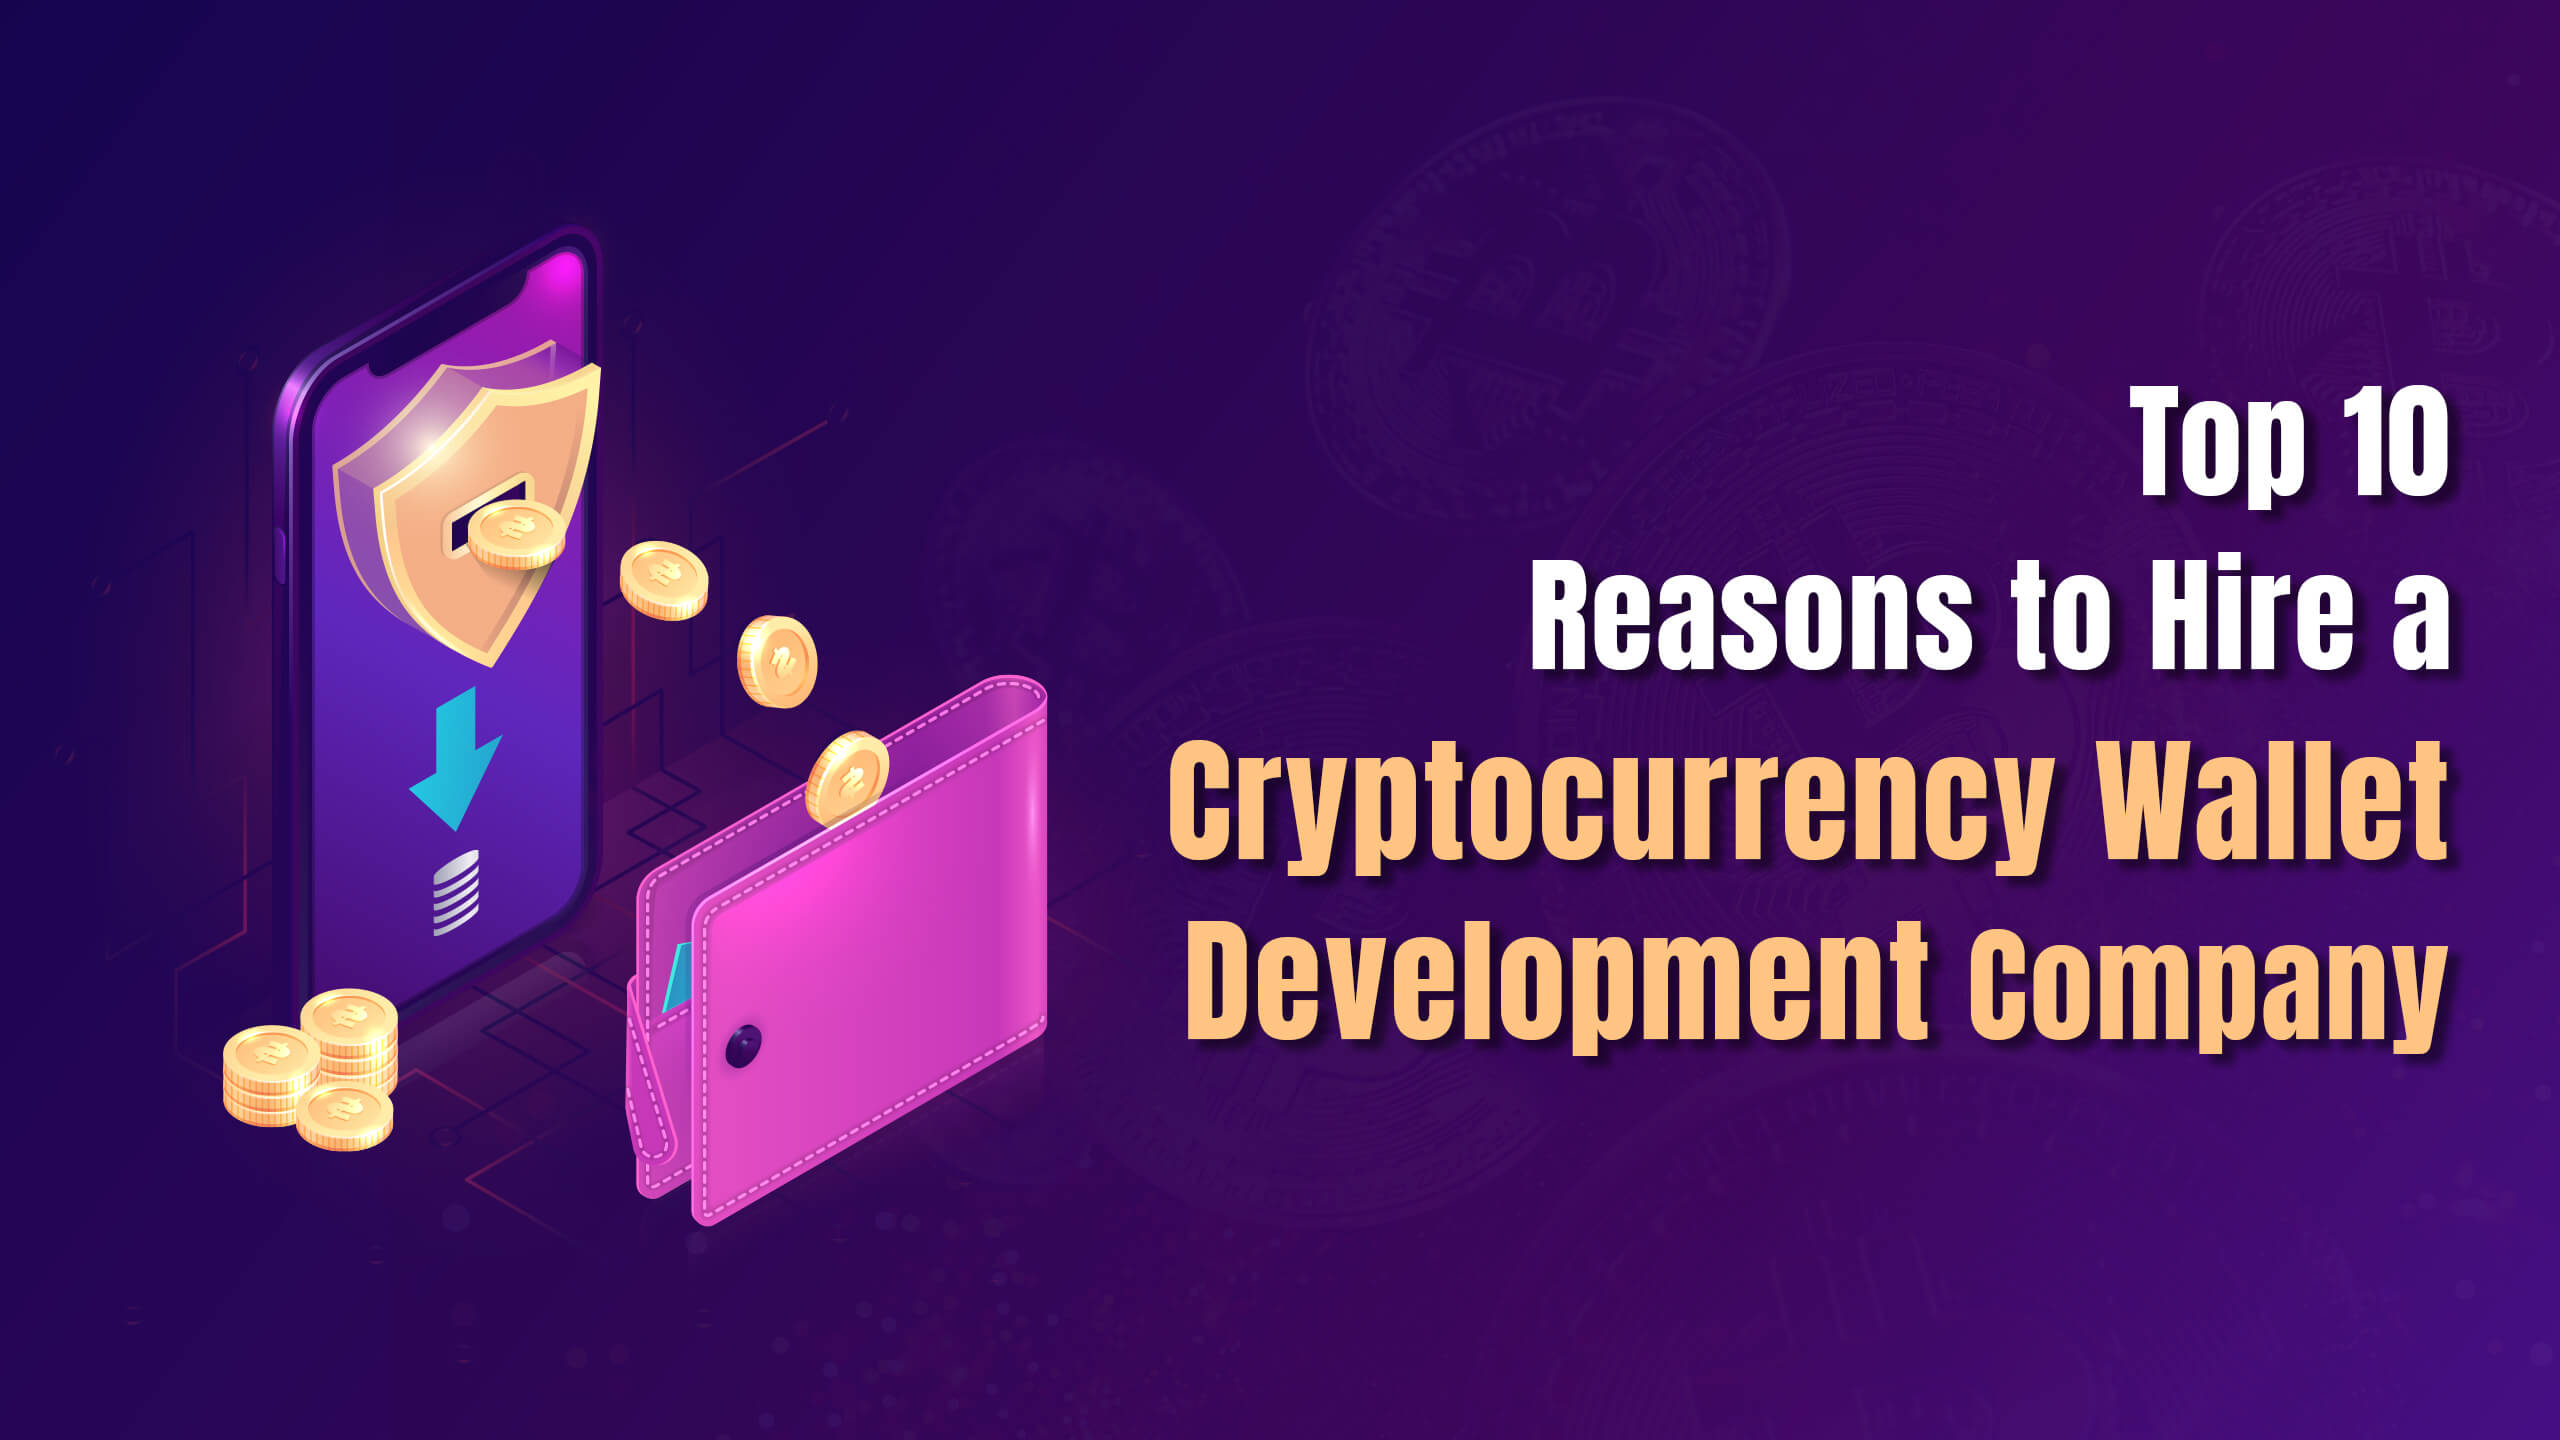 Top 10 Reasons to Hire a Cryptocurrency Wallet Development Company